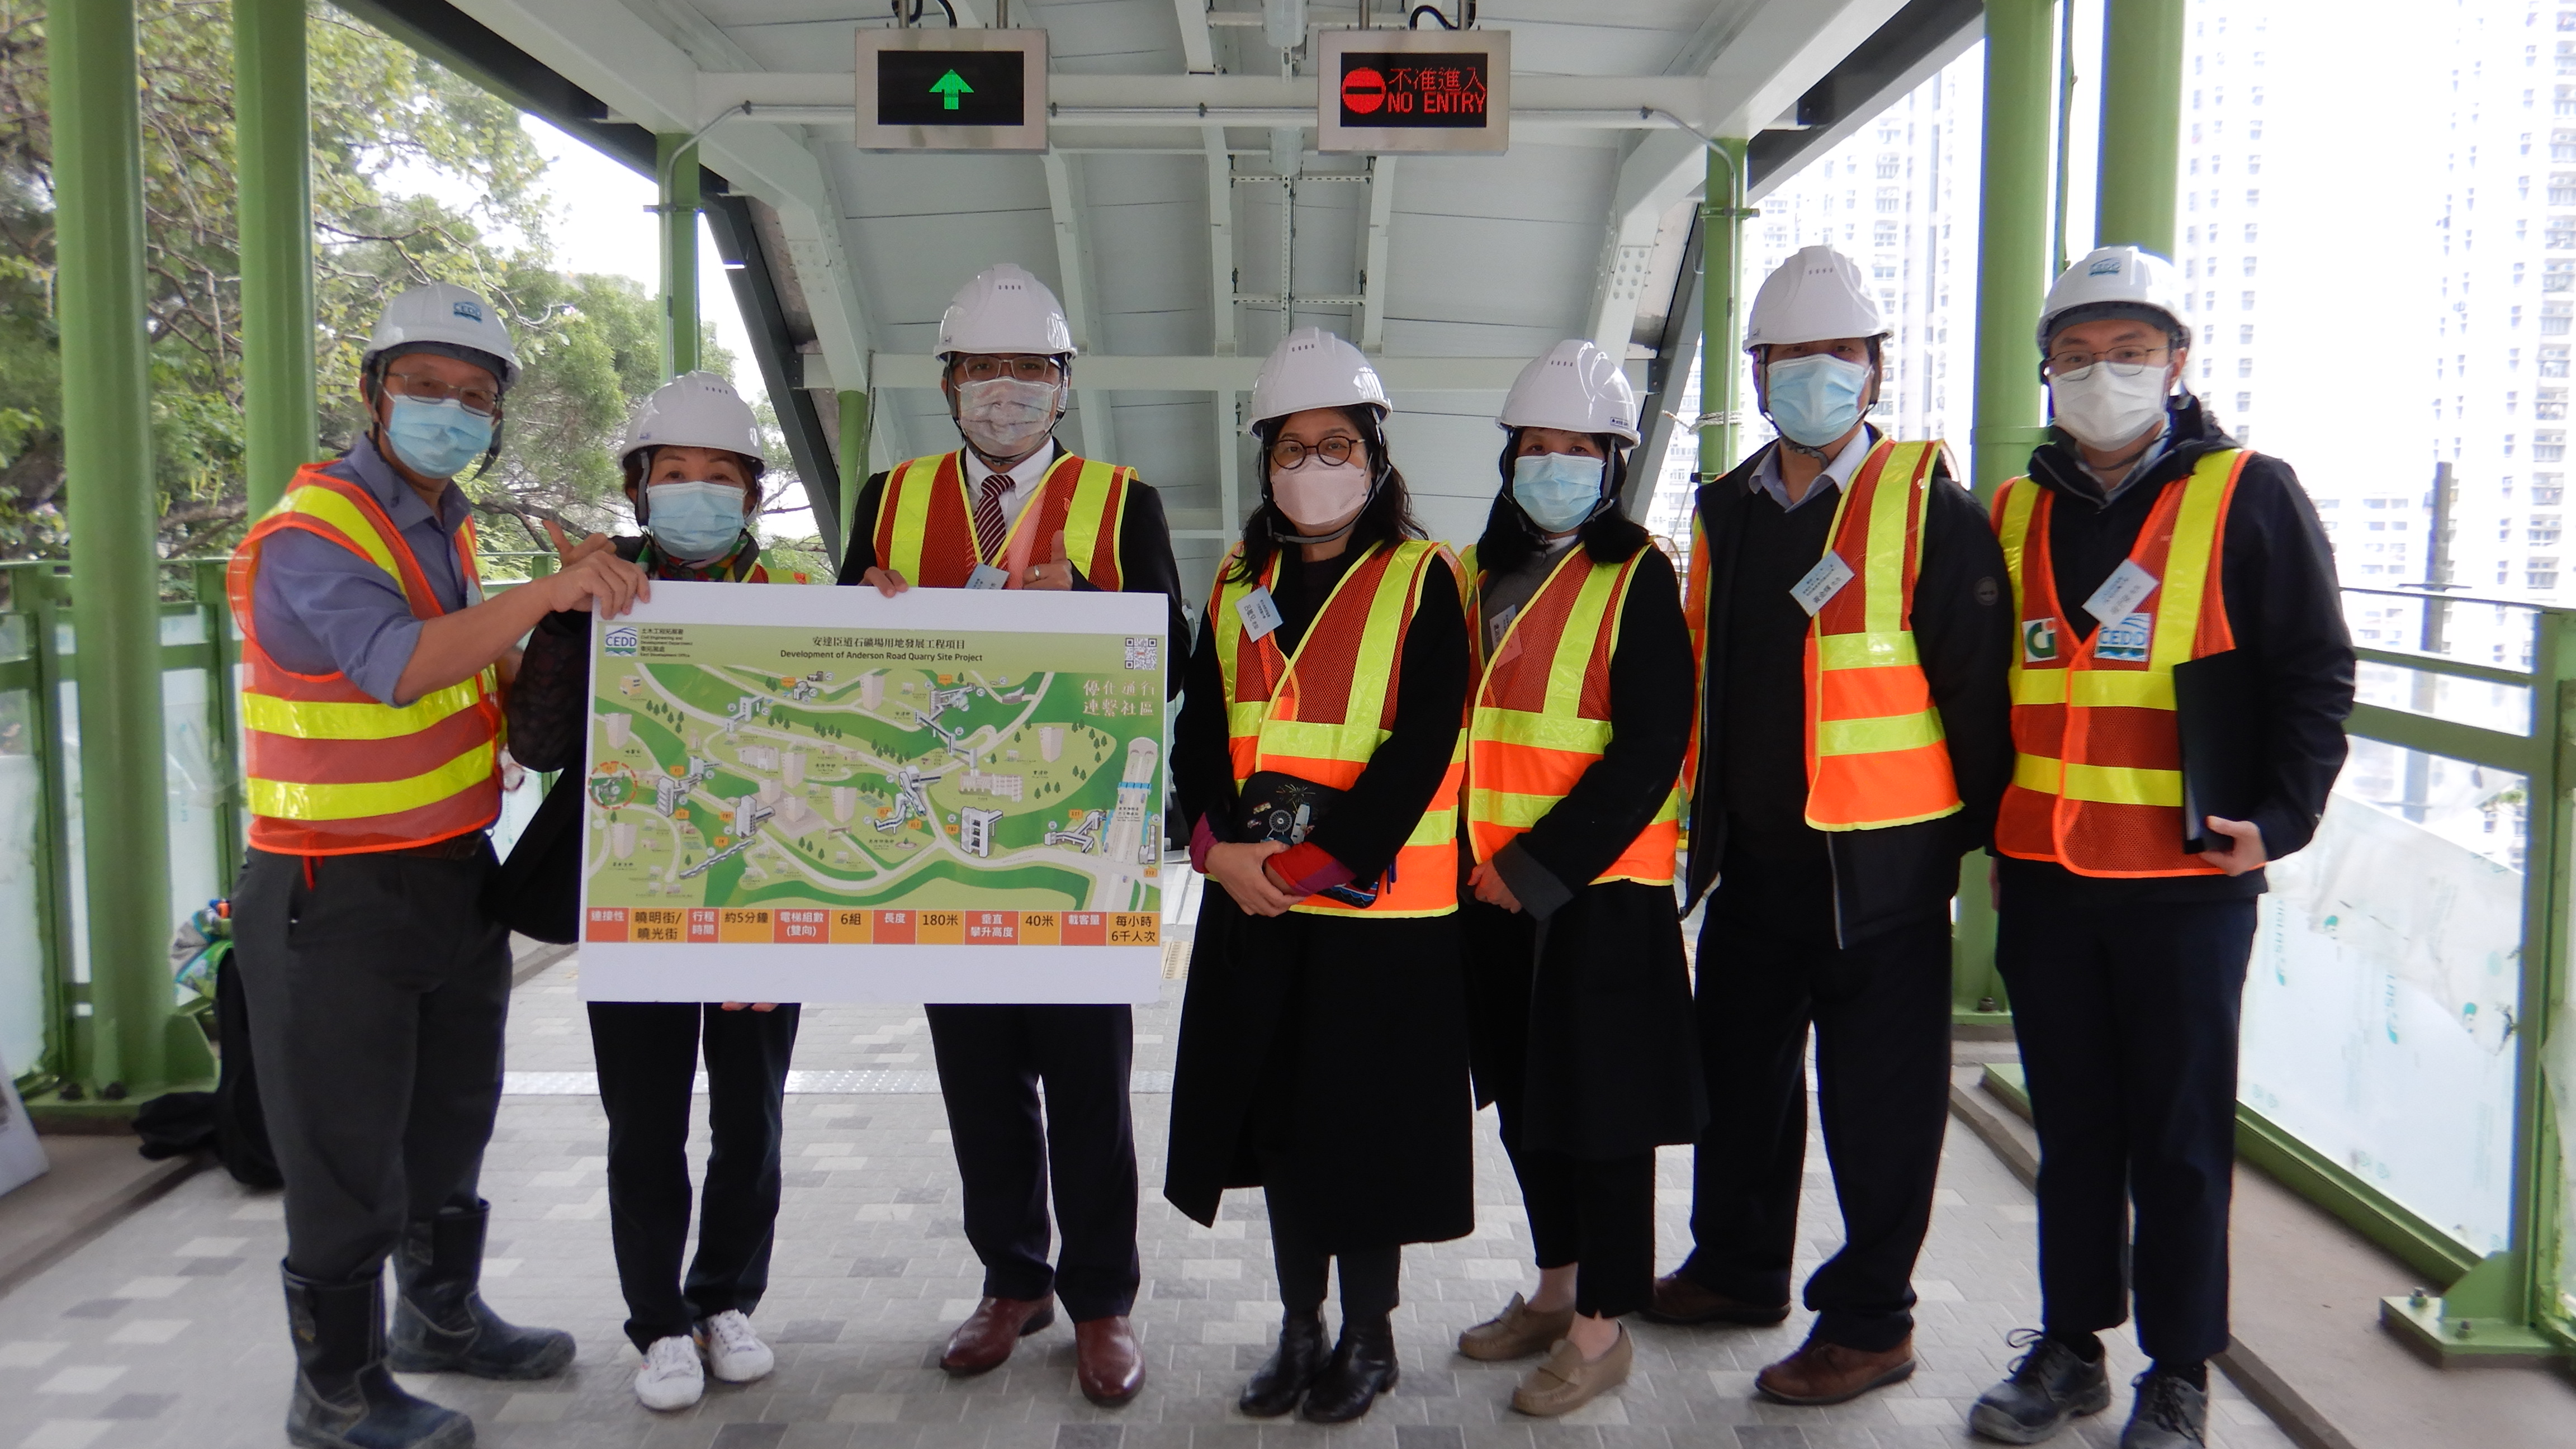 School representatives had a site visit to the escalator linking Hiu Kwong Street with Hiu Ming Street.